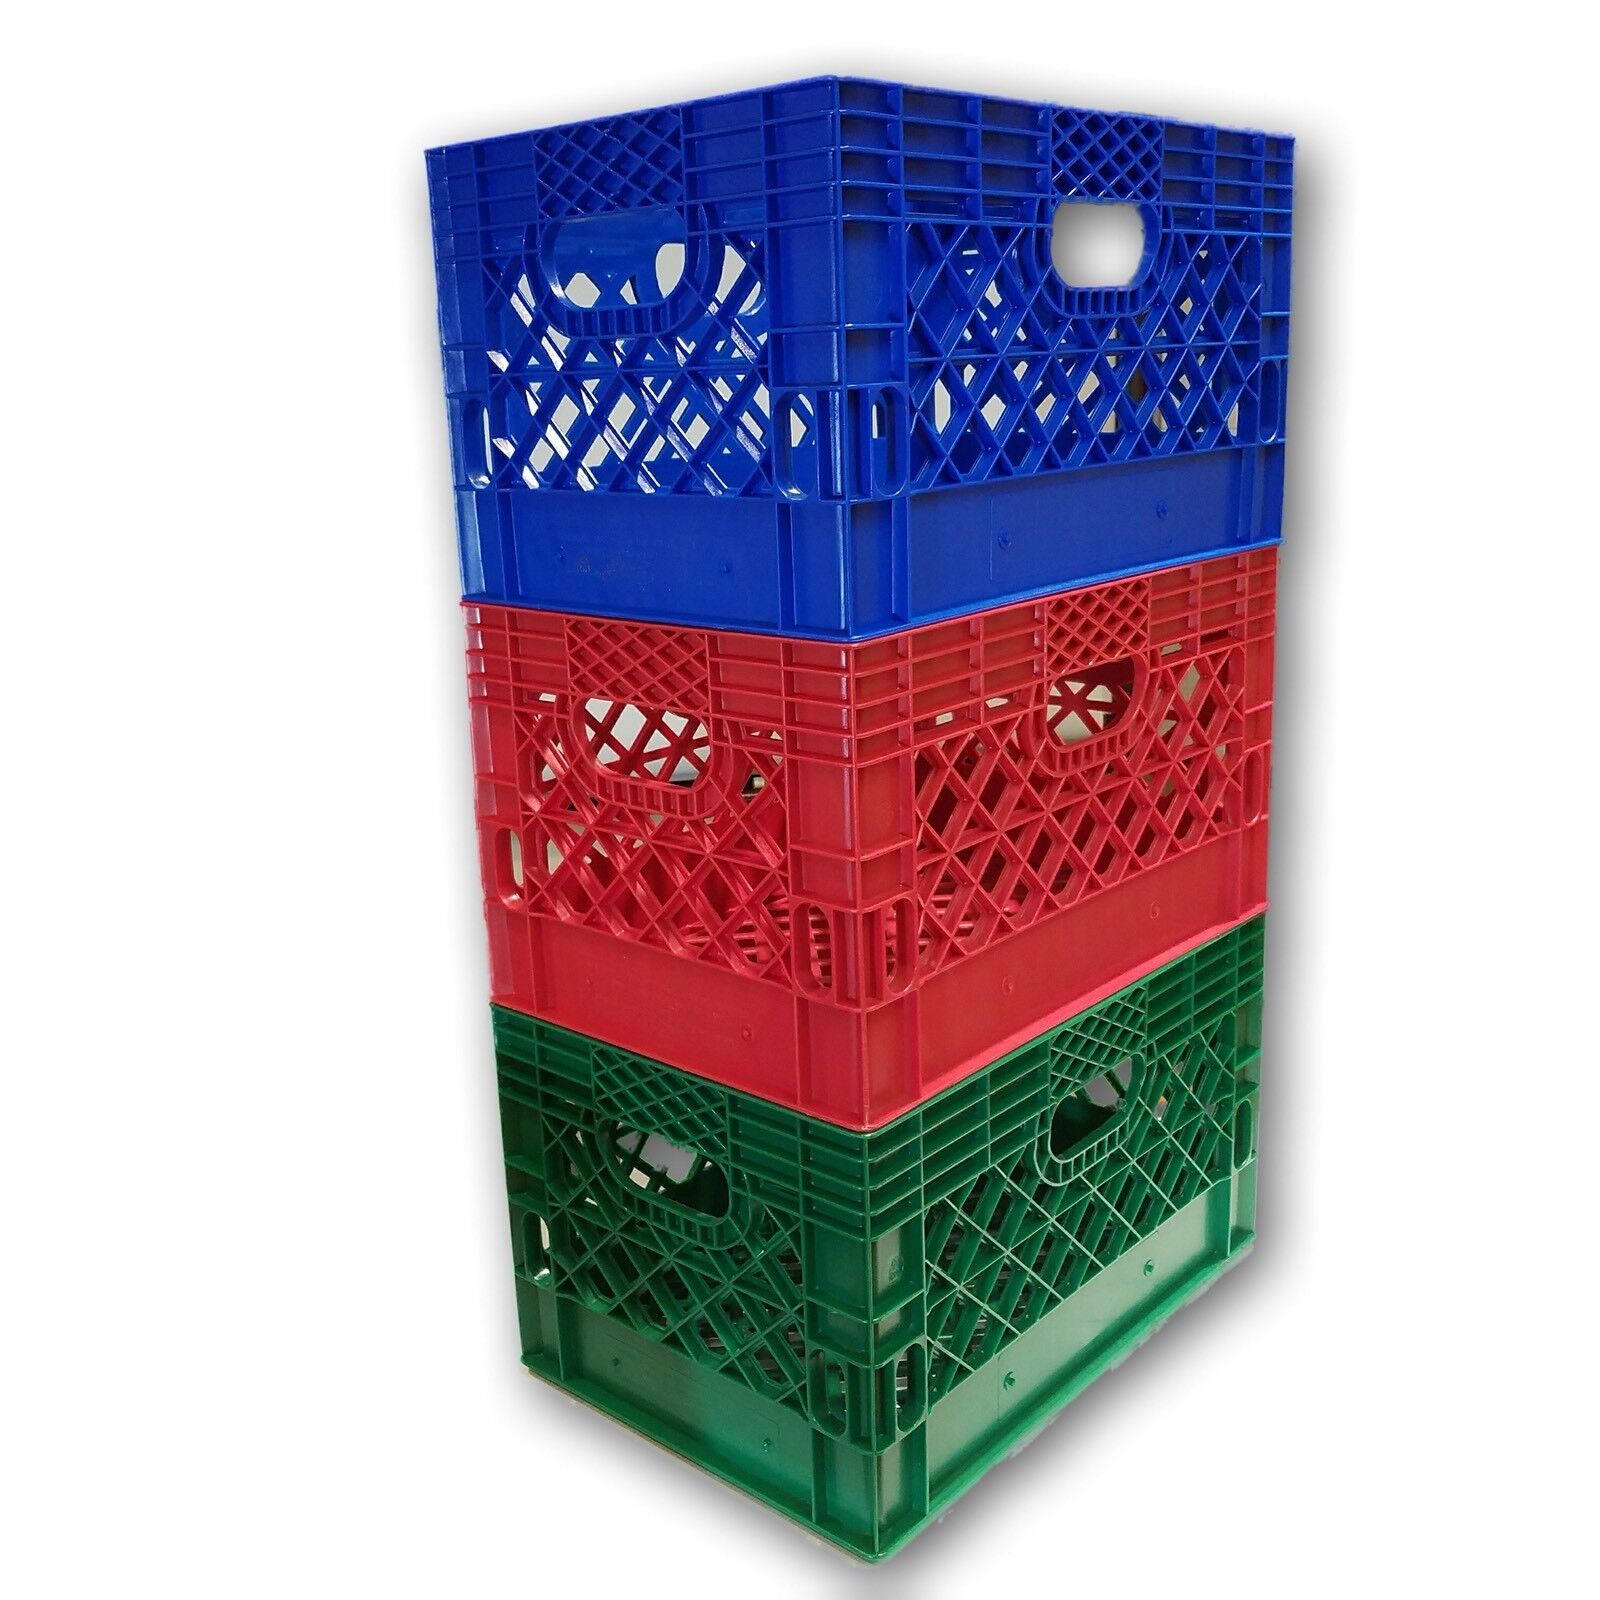 Blue Or Any Other Color You Want Rectangular Milk Crate Rigid Plastic Без бренда - фотография #2